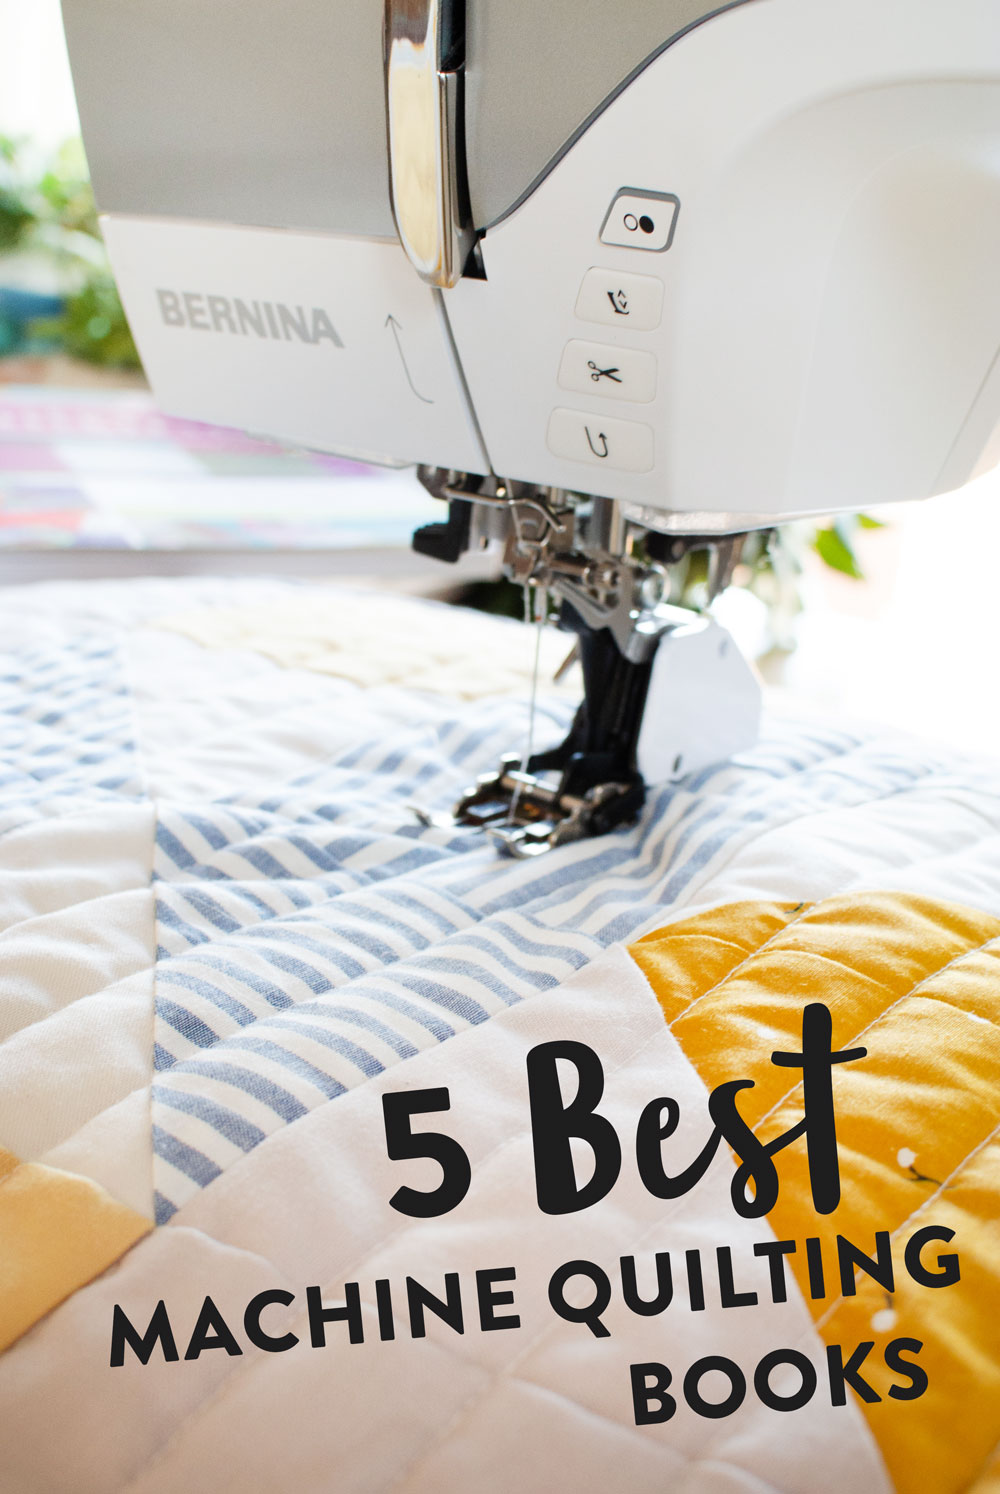 The 5 Best Machine Quilting books to help you jumpstart your skills and allow you to quilt like a pro on your domestic sewing machine at home!